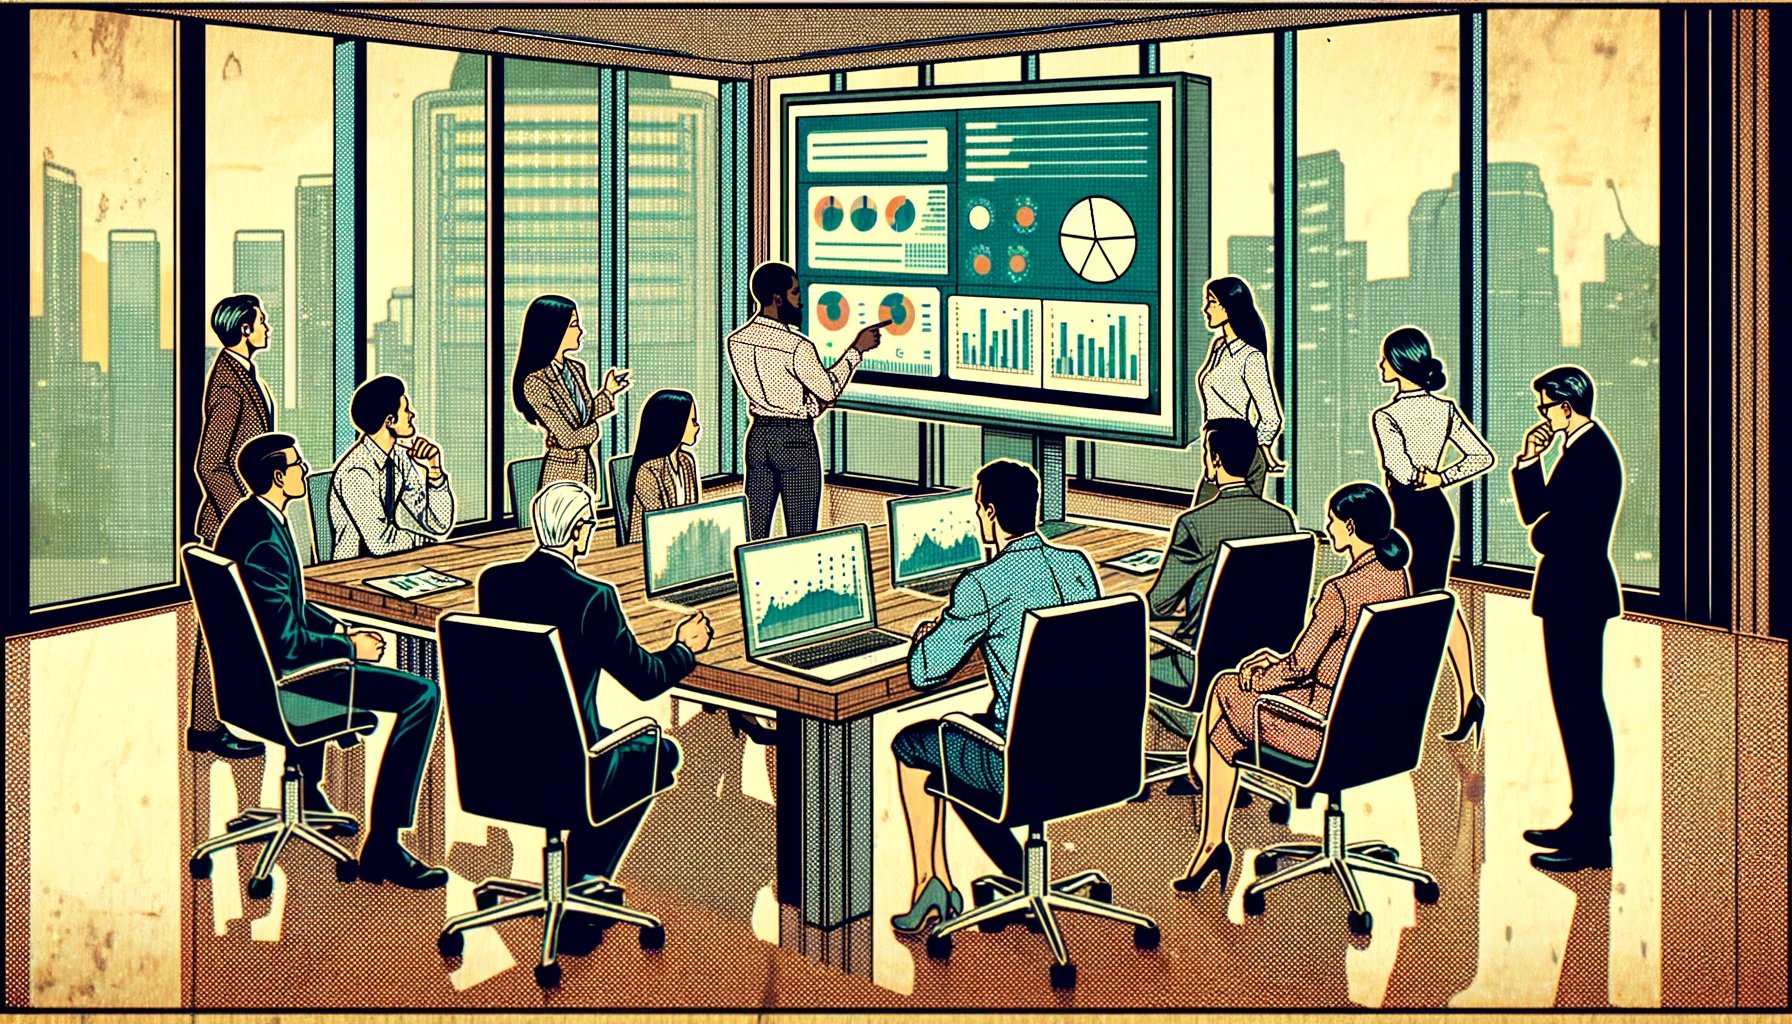 DALL·E 2024-03-10 10.06.58 - An old comic book style image depicting a diverse group of professionals in a modern office setting, discussing and analyzing data charts on a digital